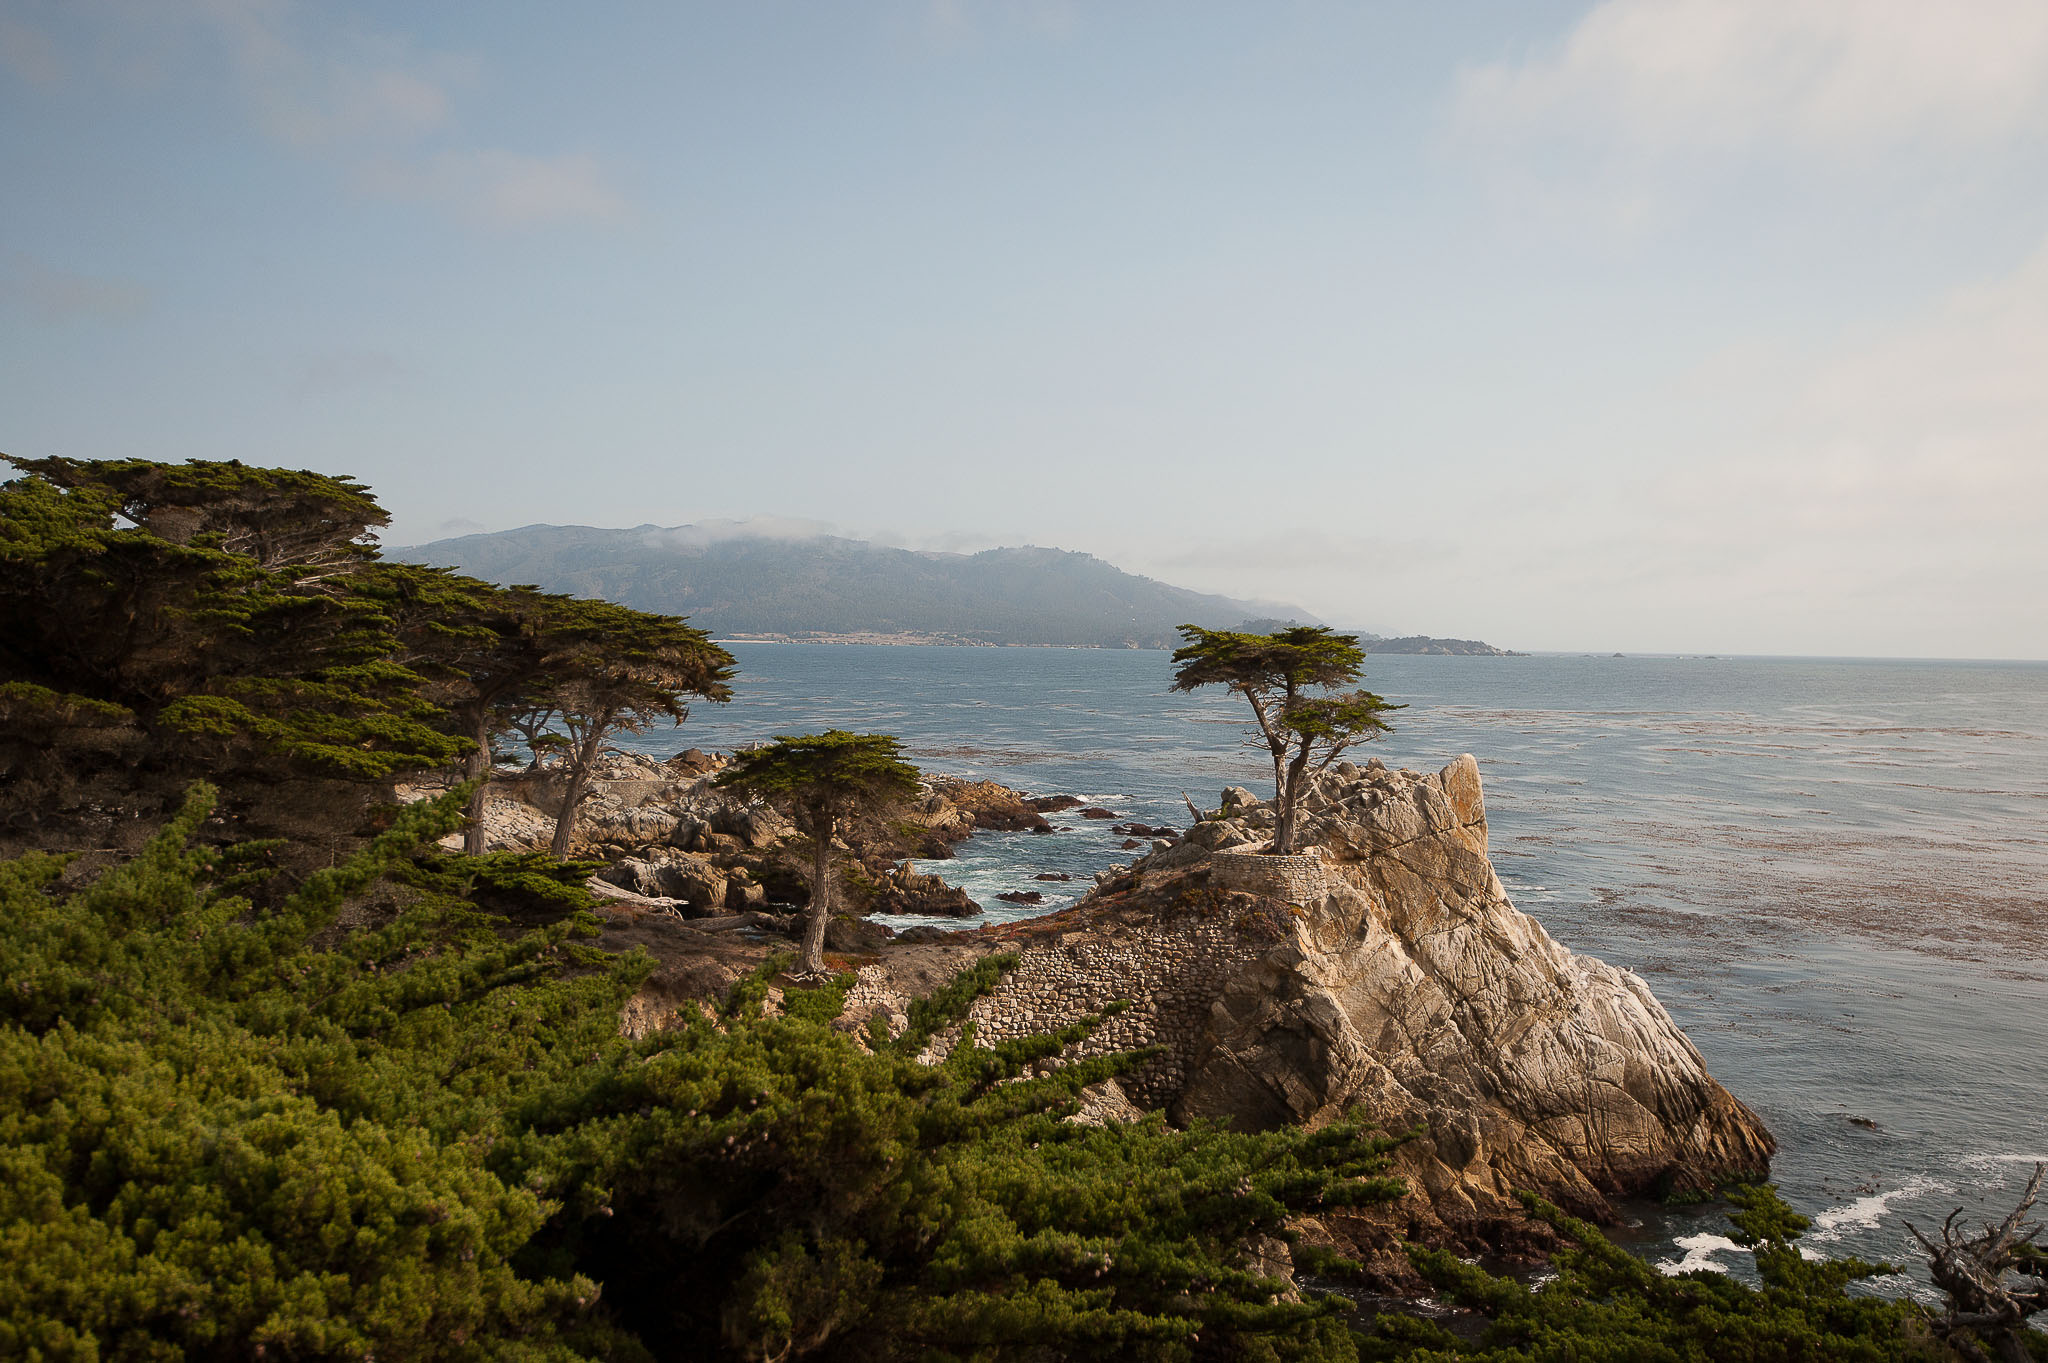 The Lone Cypress on 17 Mile Drive